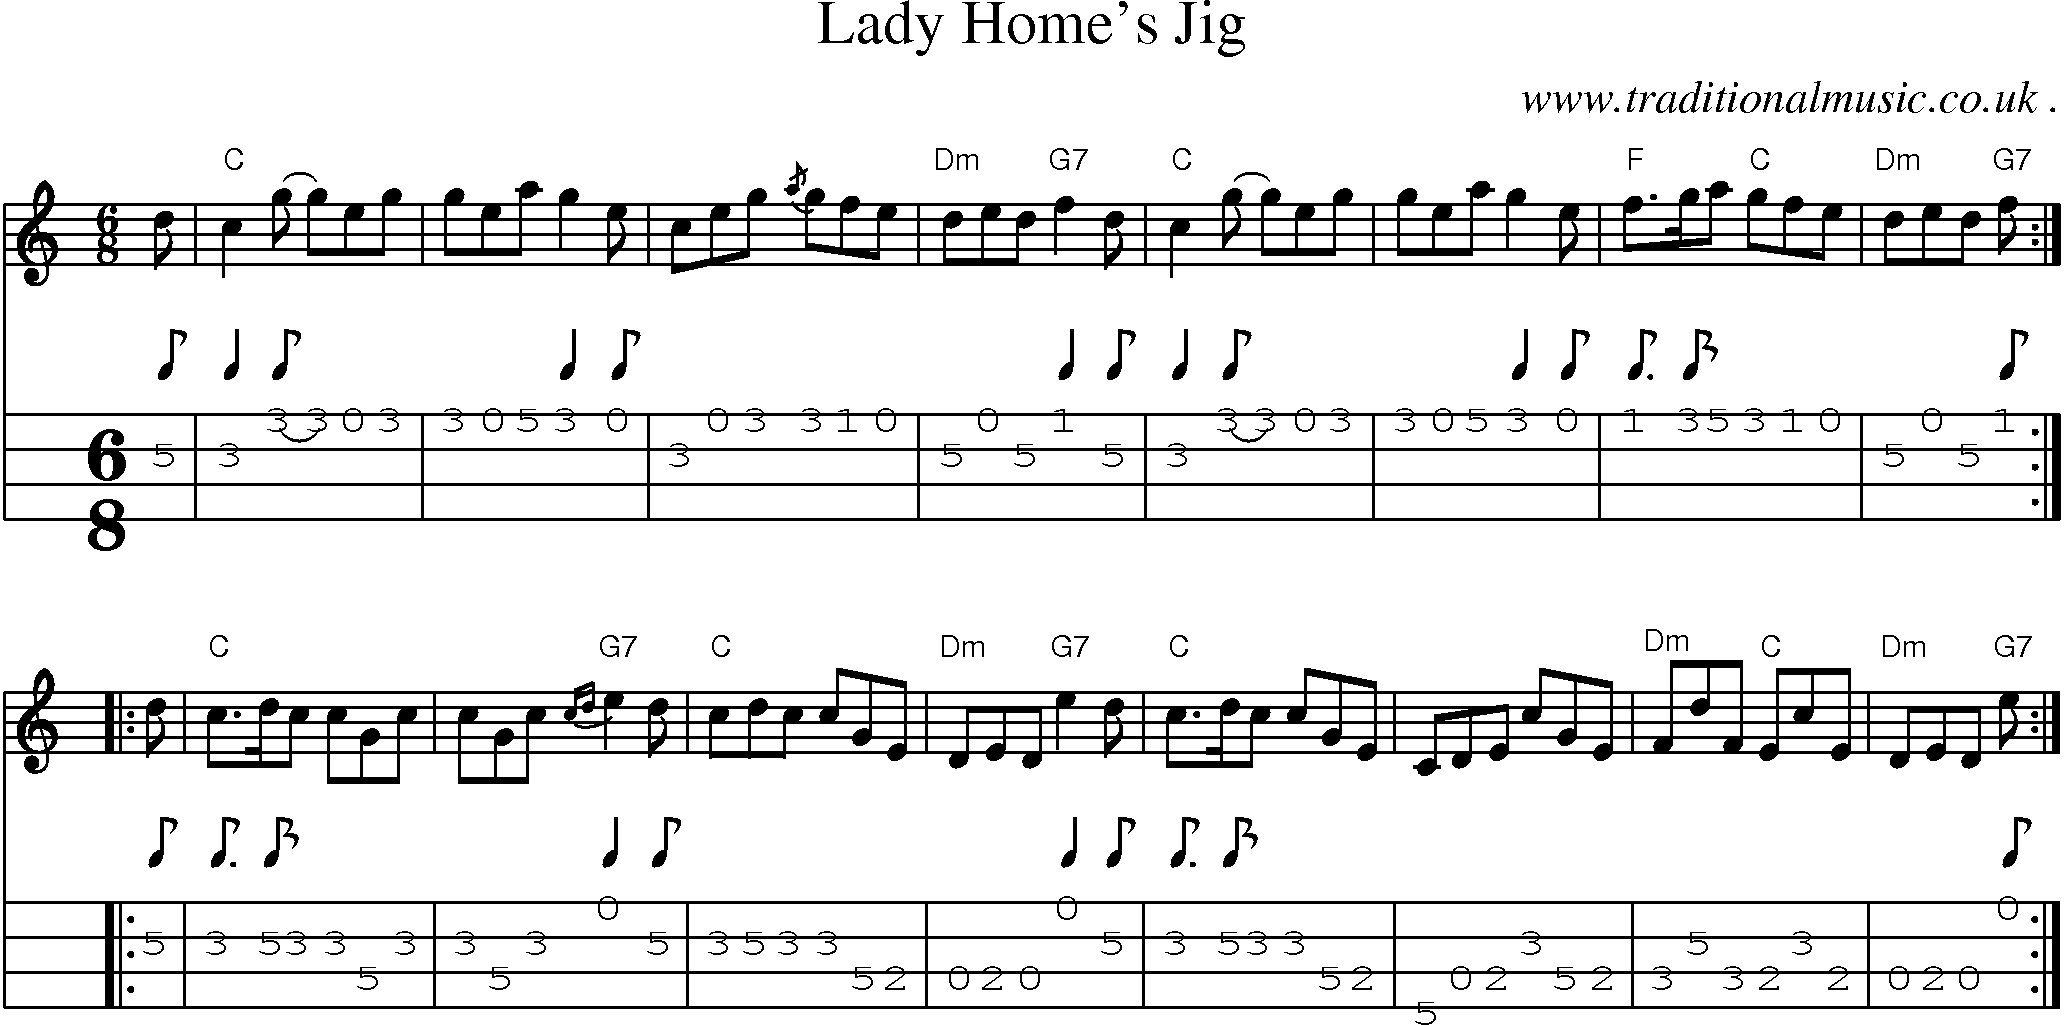 Sheet-music  score, Chords and Mandolin Tabs for Lady Homes Jig